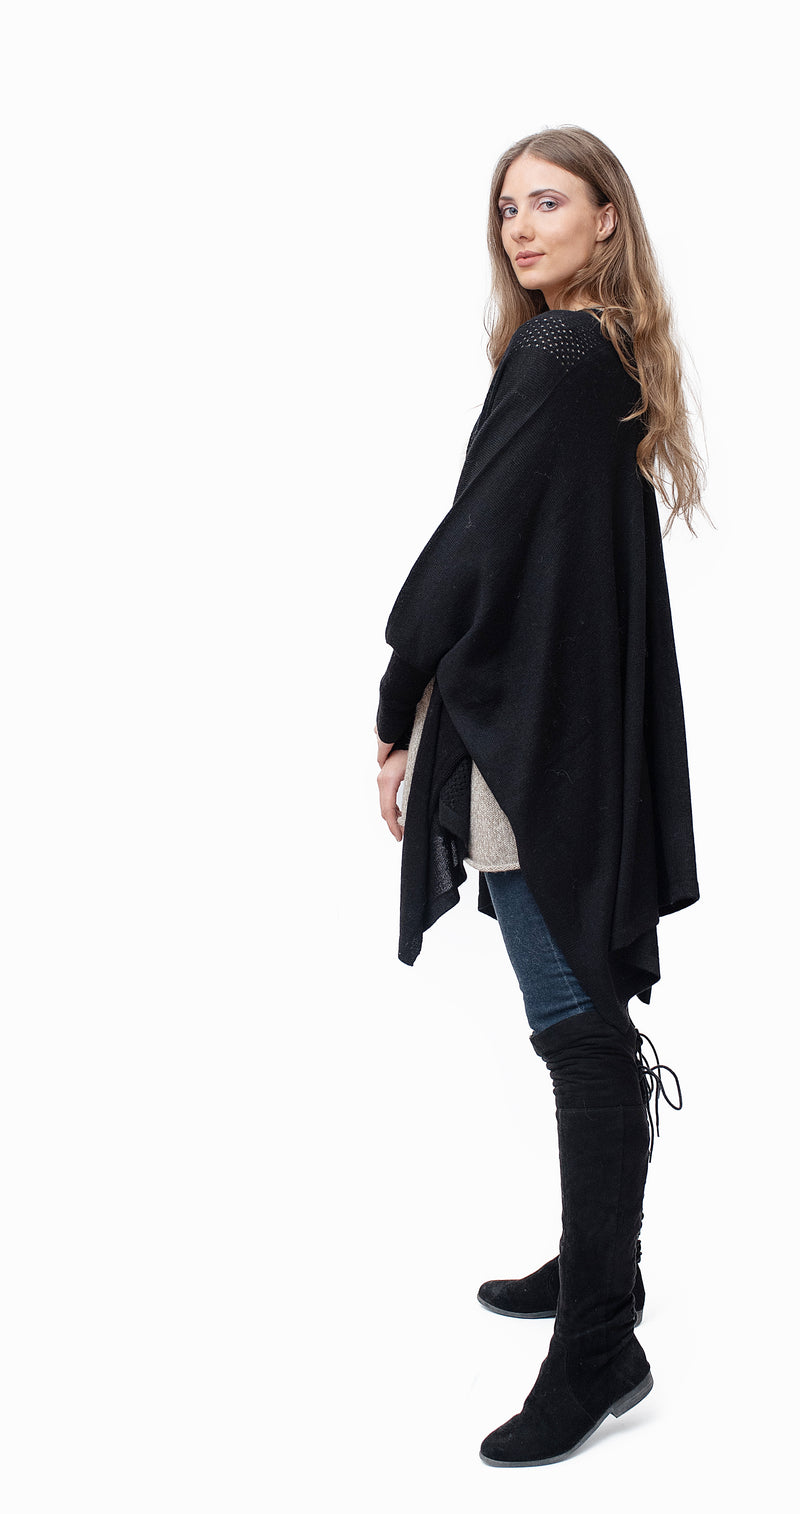 Baby Alpaca - Warm "Nathalie" Knit Light Weight Cardigan  - One Size Fits All (Black)